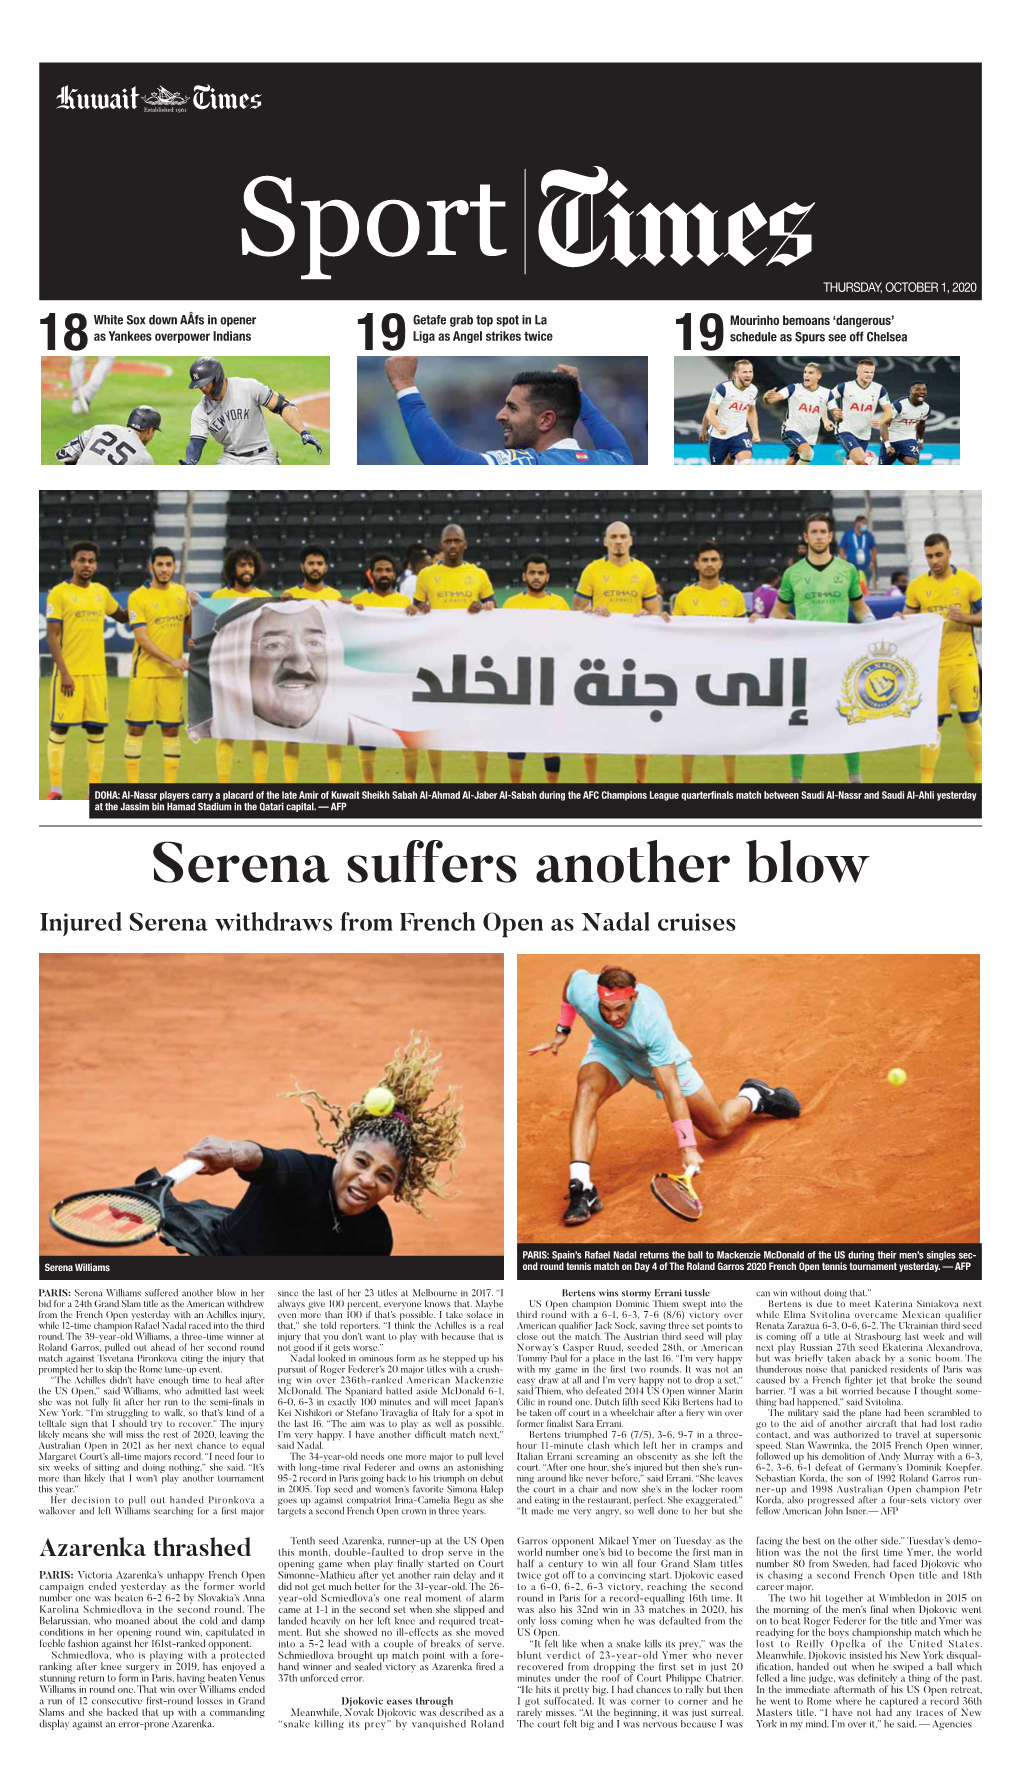 Serena Suffers Another Blow Injured Serena Withdraws from French Open As Nadal Cruises